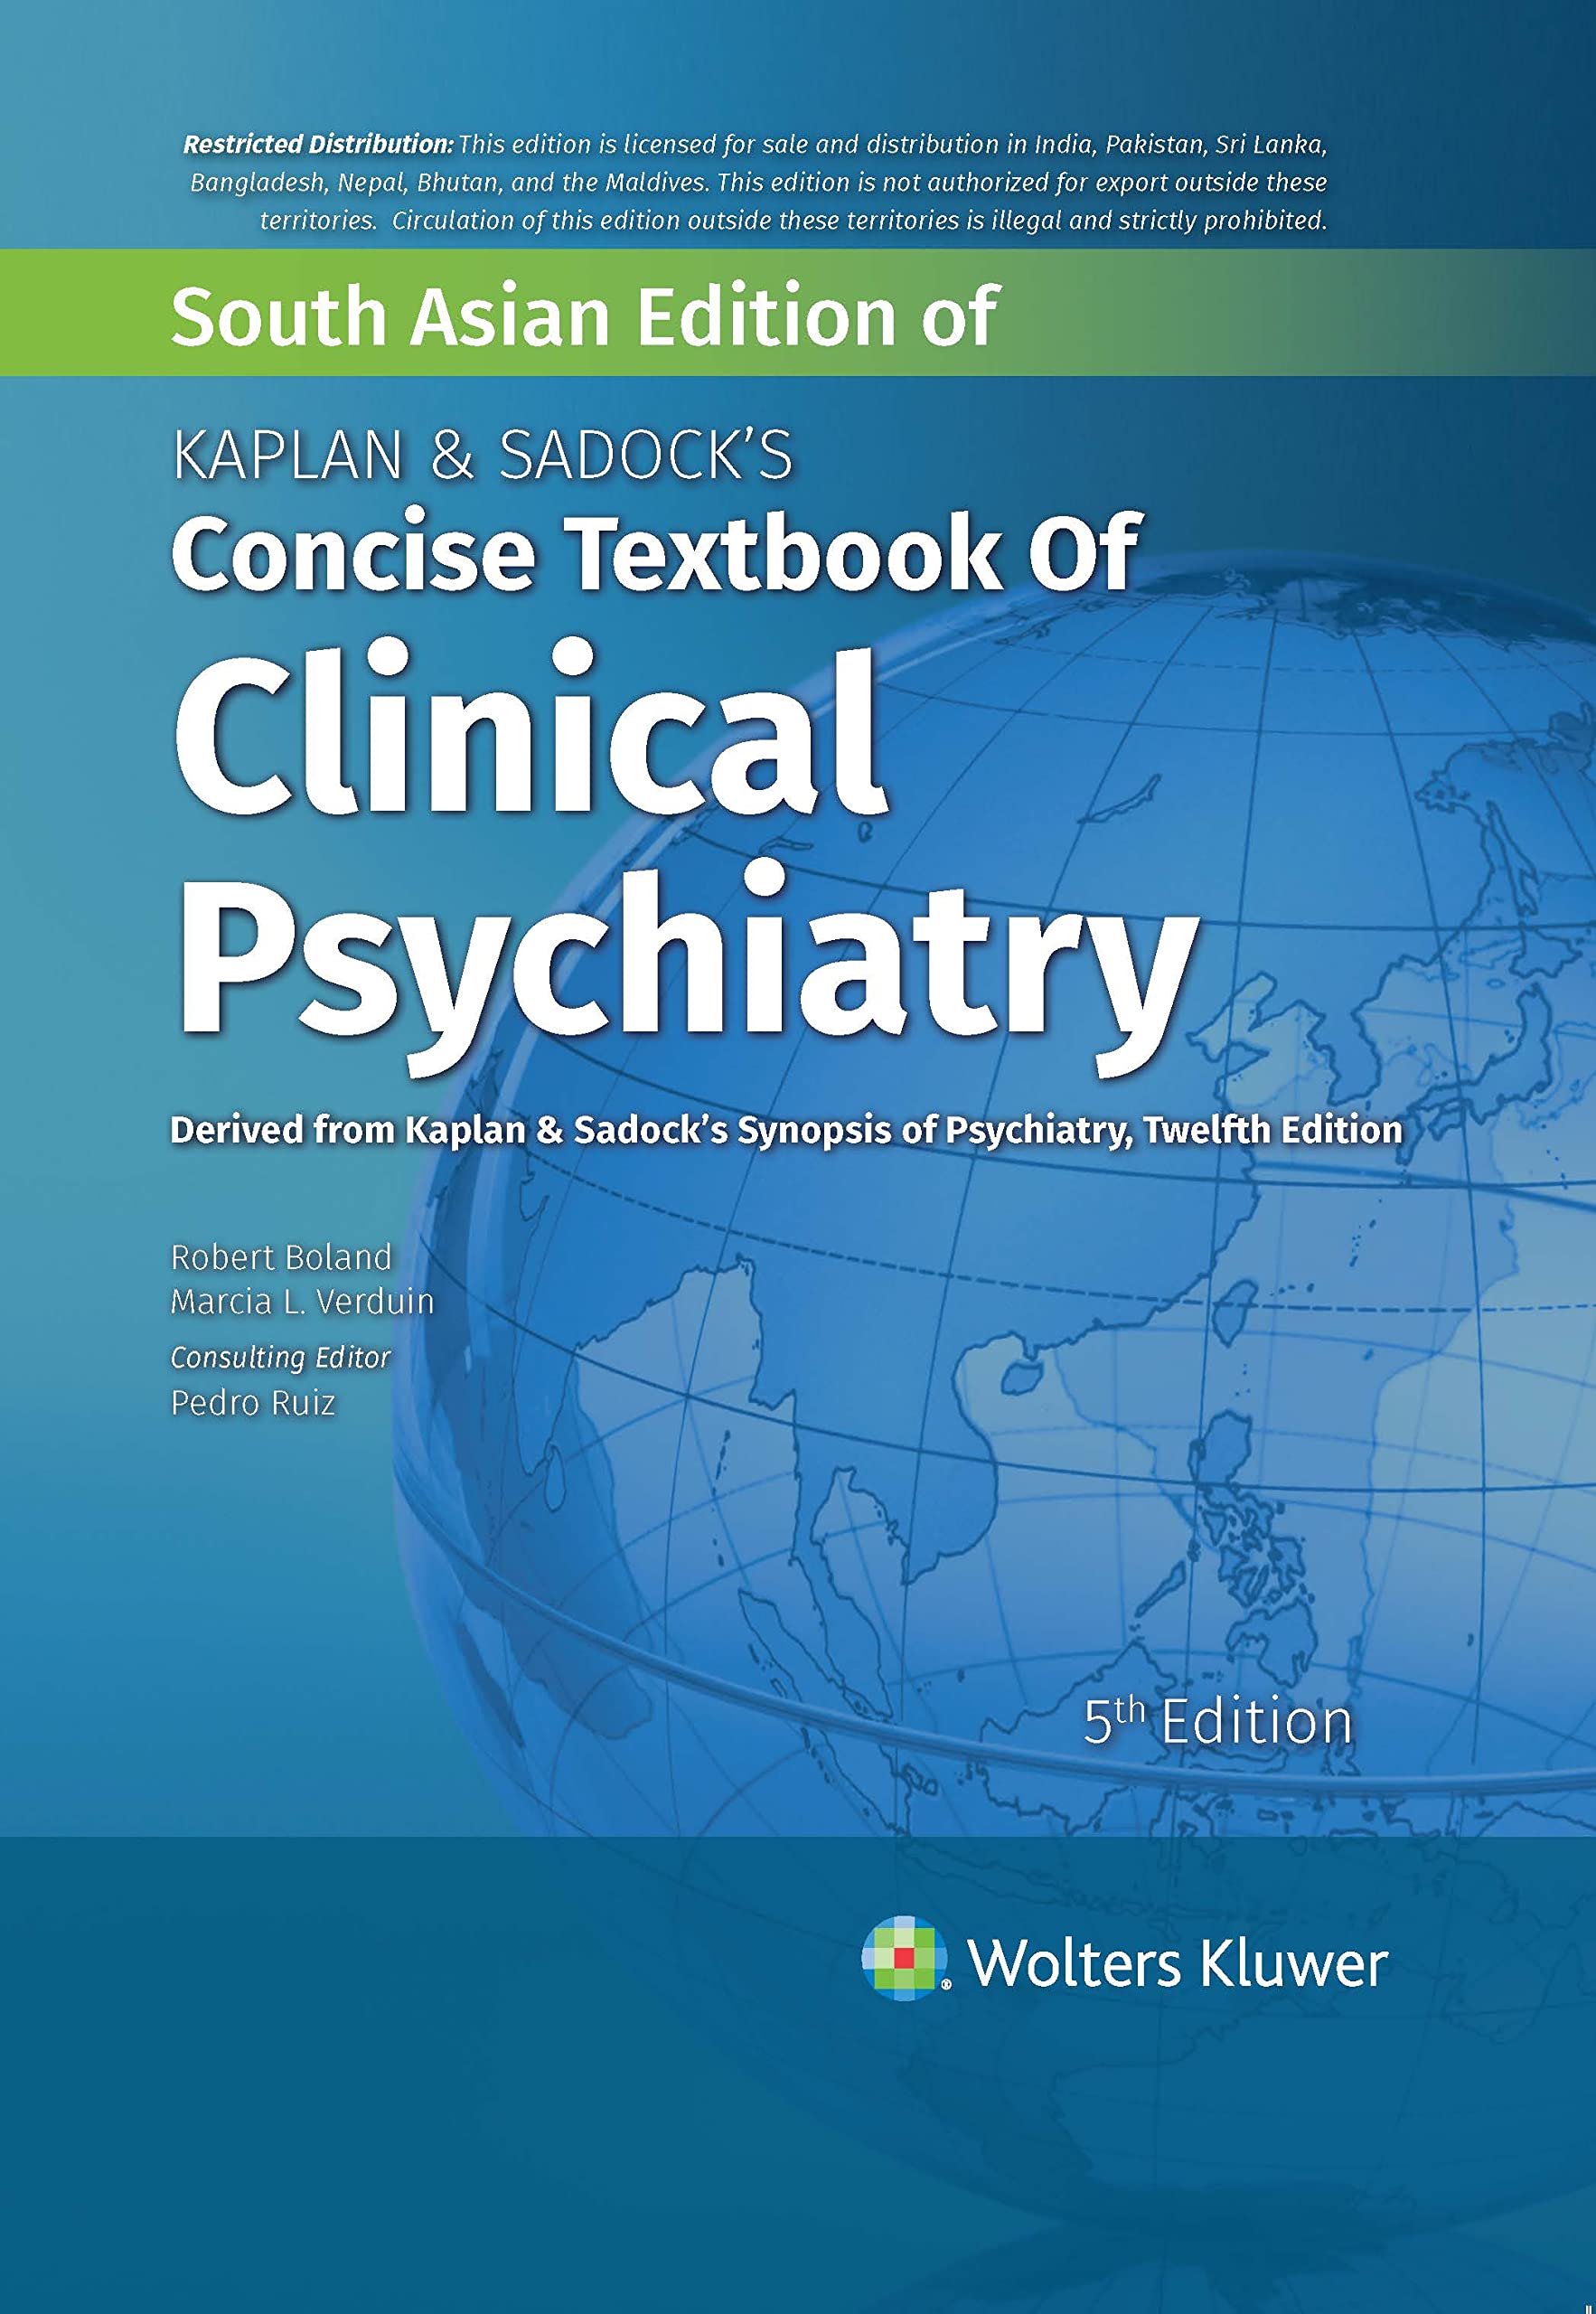 kaplan-sadock-s-concise-textbook-of-clinical-psychiatry-1st-edition